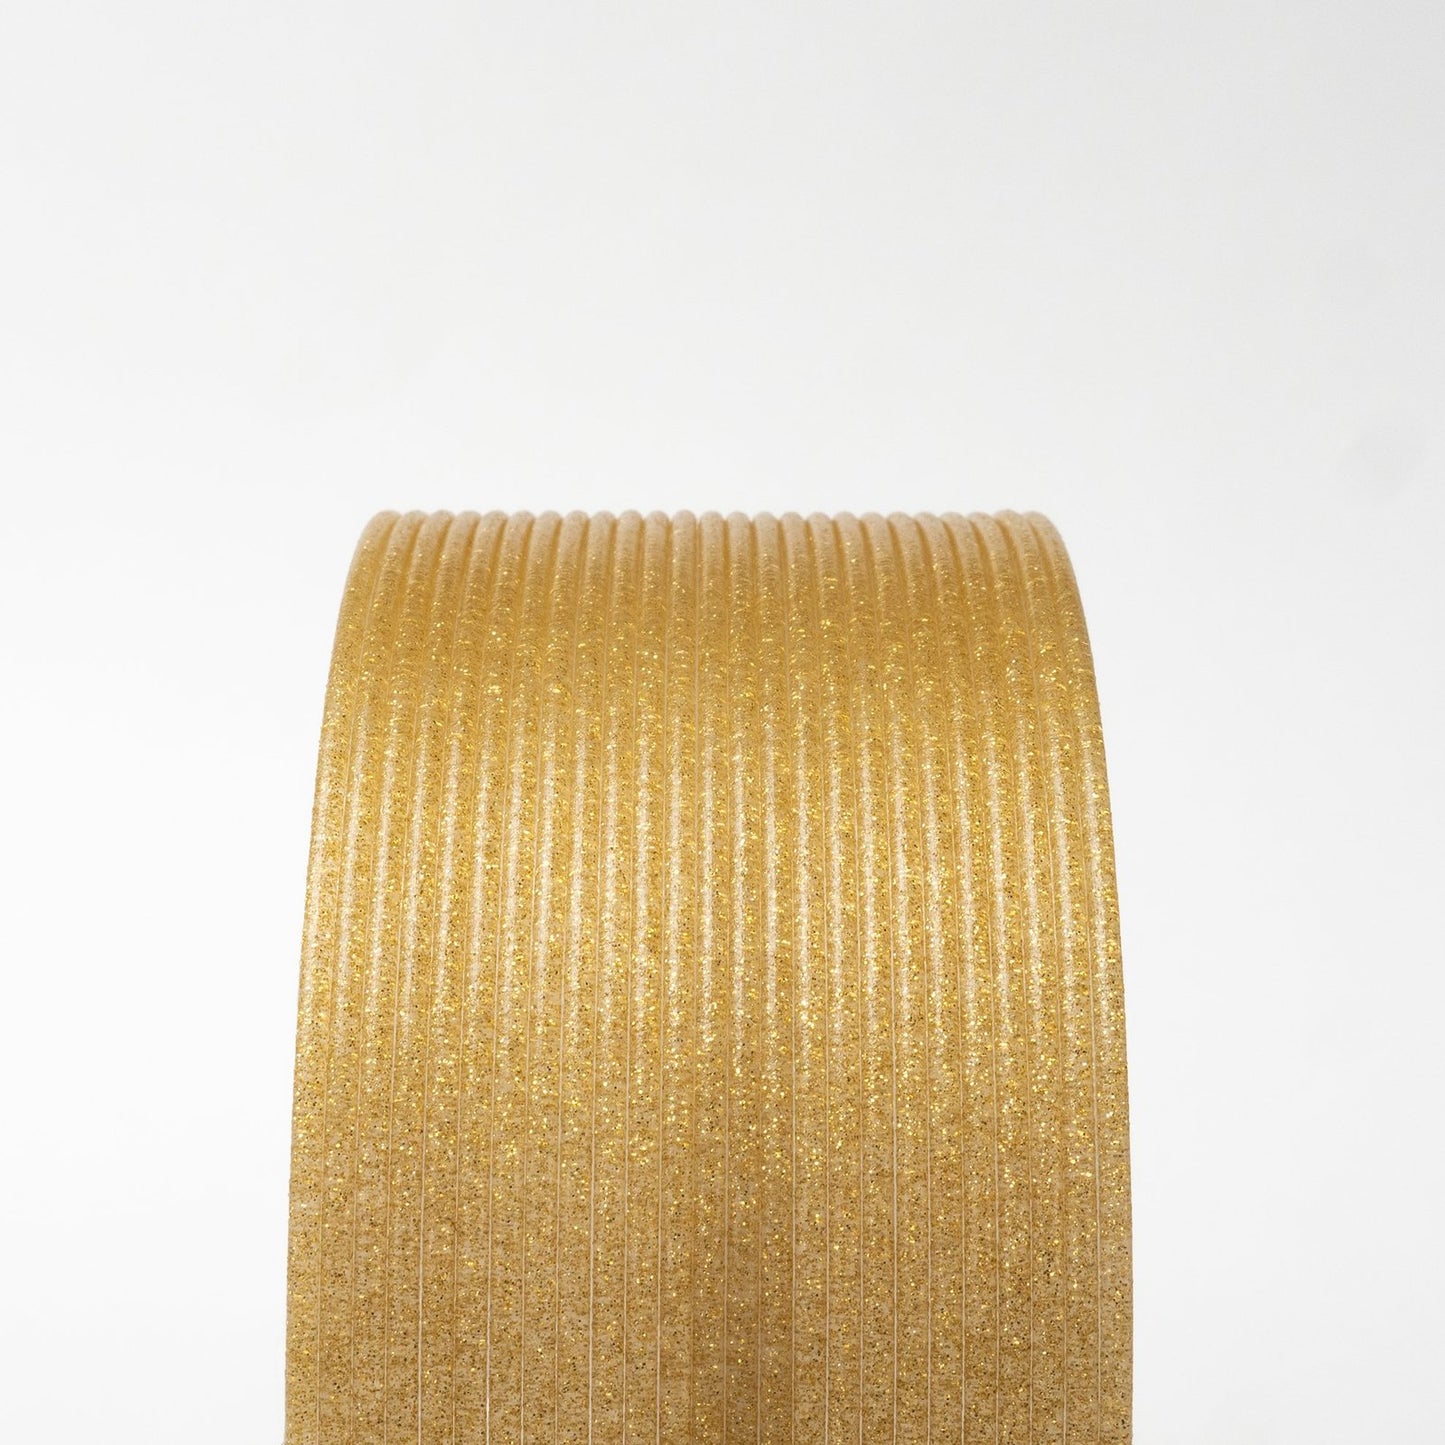 Gold Dust Translucent HTPLA with Gold Glitter